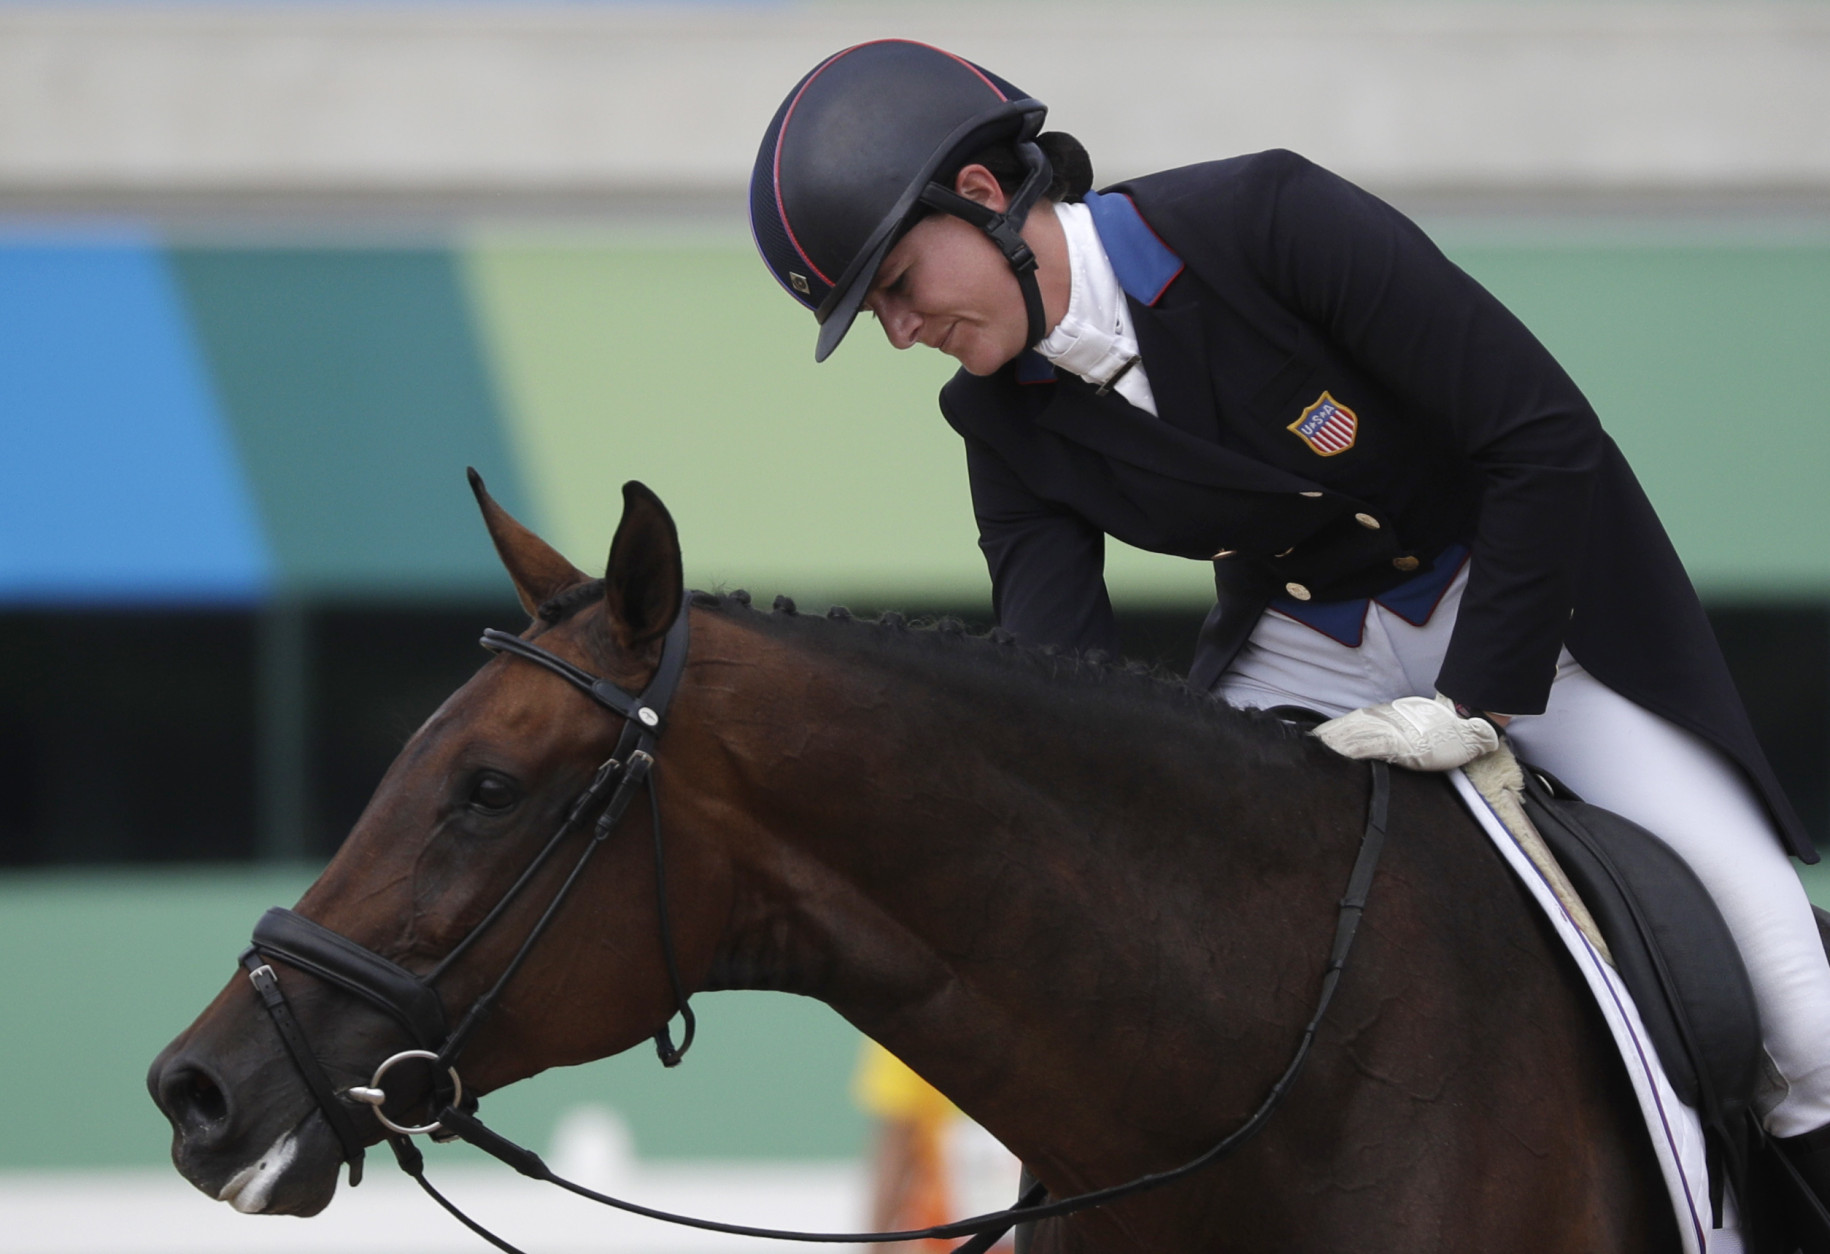 Lauren Kieffer, of the United States, reacts on Veronica after competing in the equestrian eventing dressage competition at the 2016 Summer Olympics in Rio de Janeiro, Brazil, Sunday, Aug. 7, 2016. (AP Photo/John Locher)